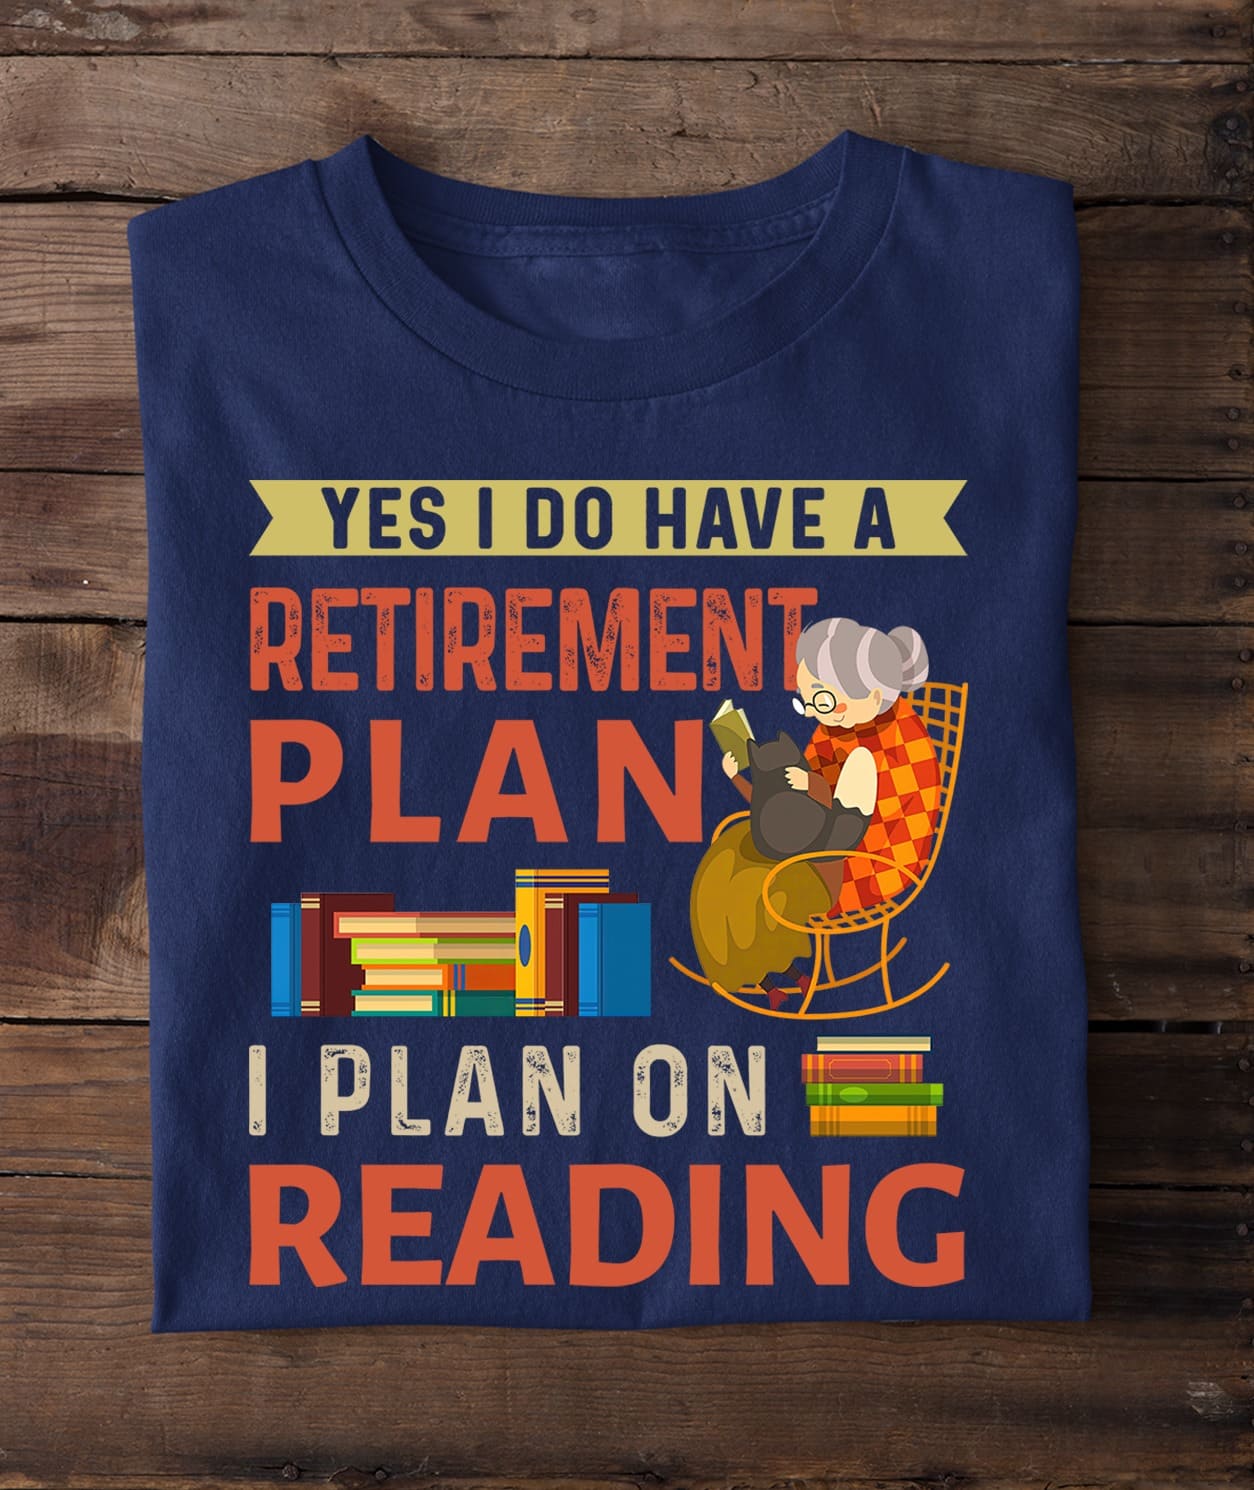 Yes I do have a retirement plan I plan on reading - Book grandma, grandma loves reading book